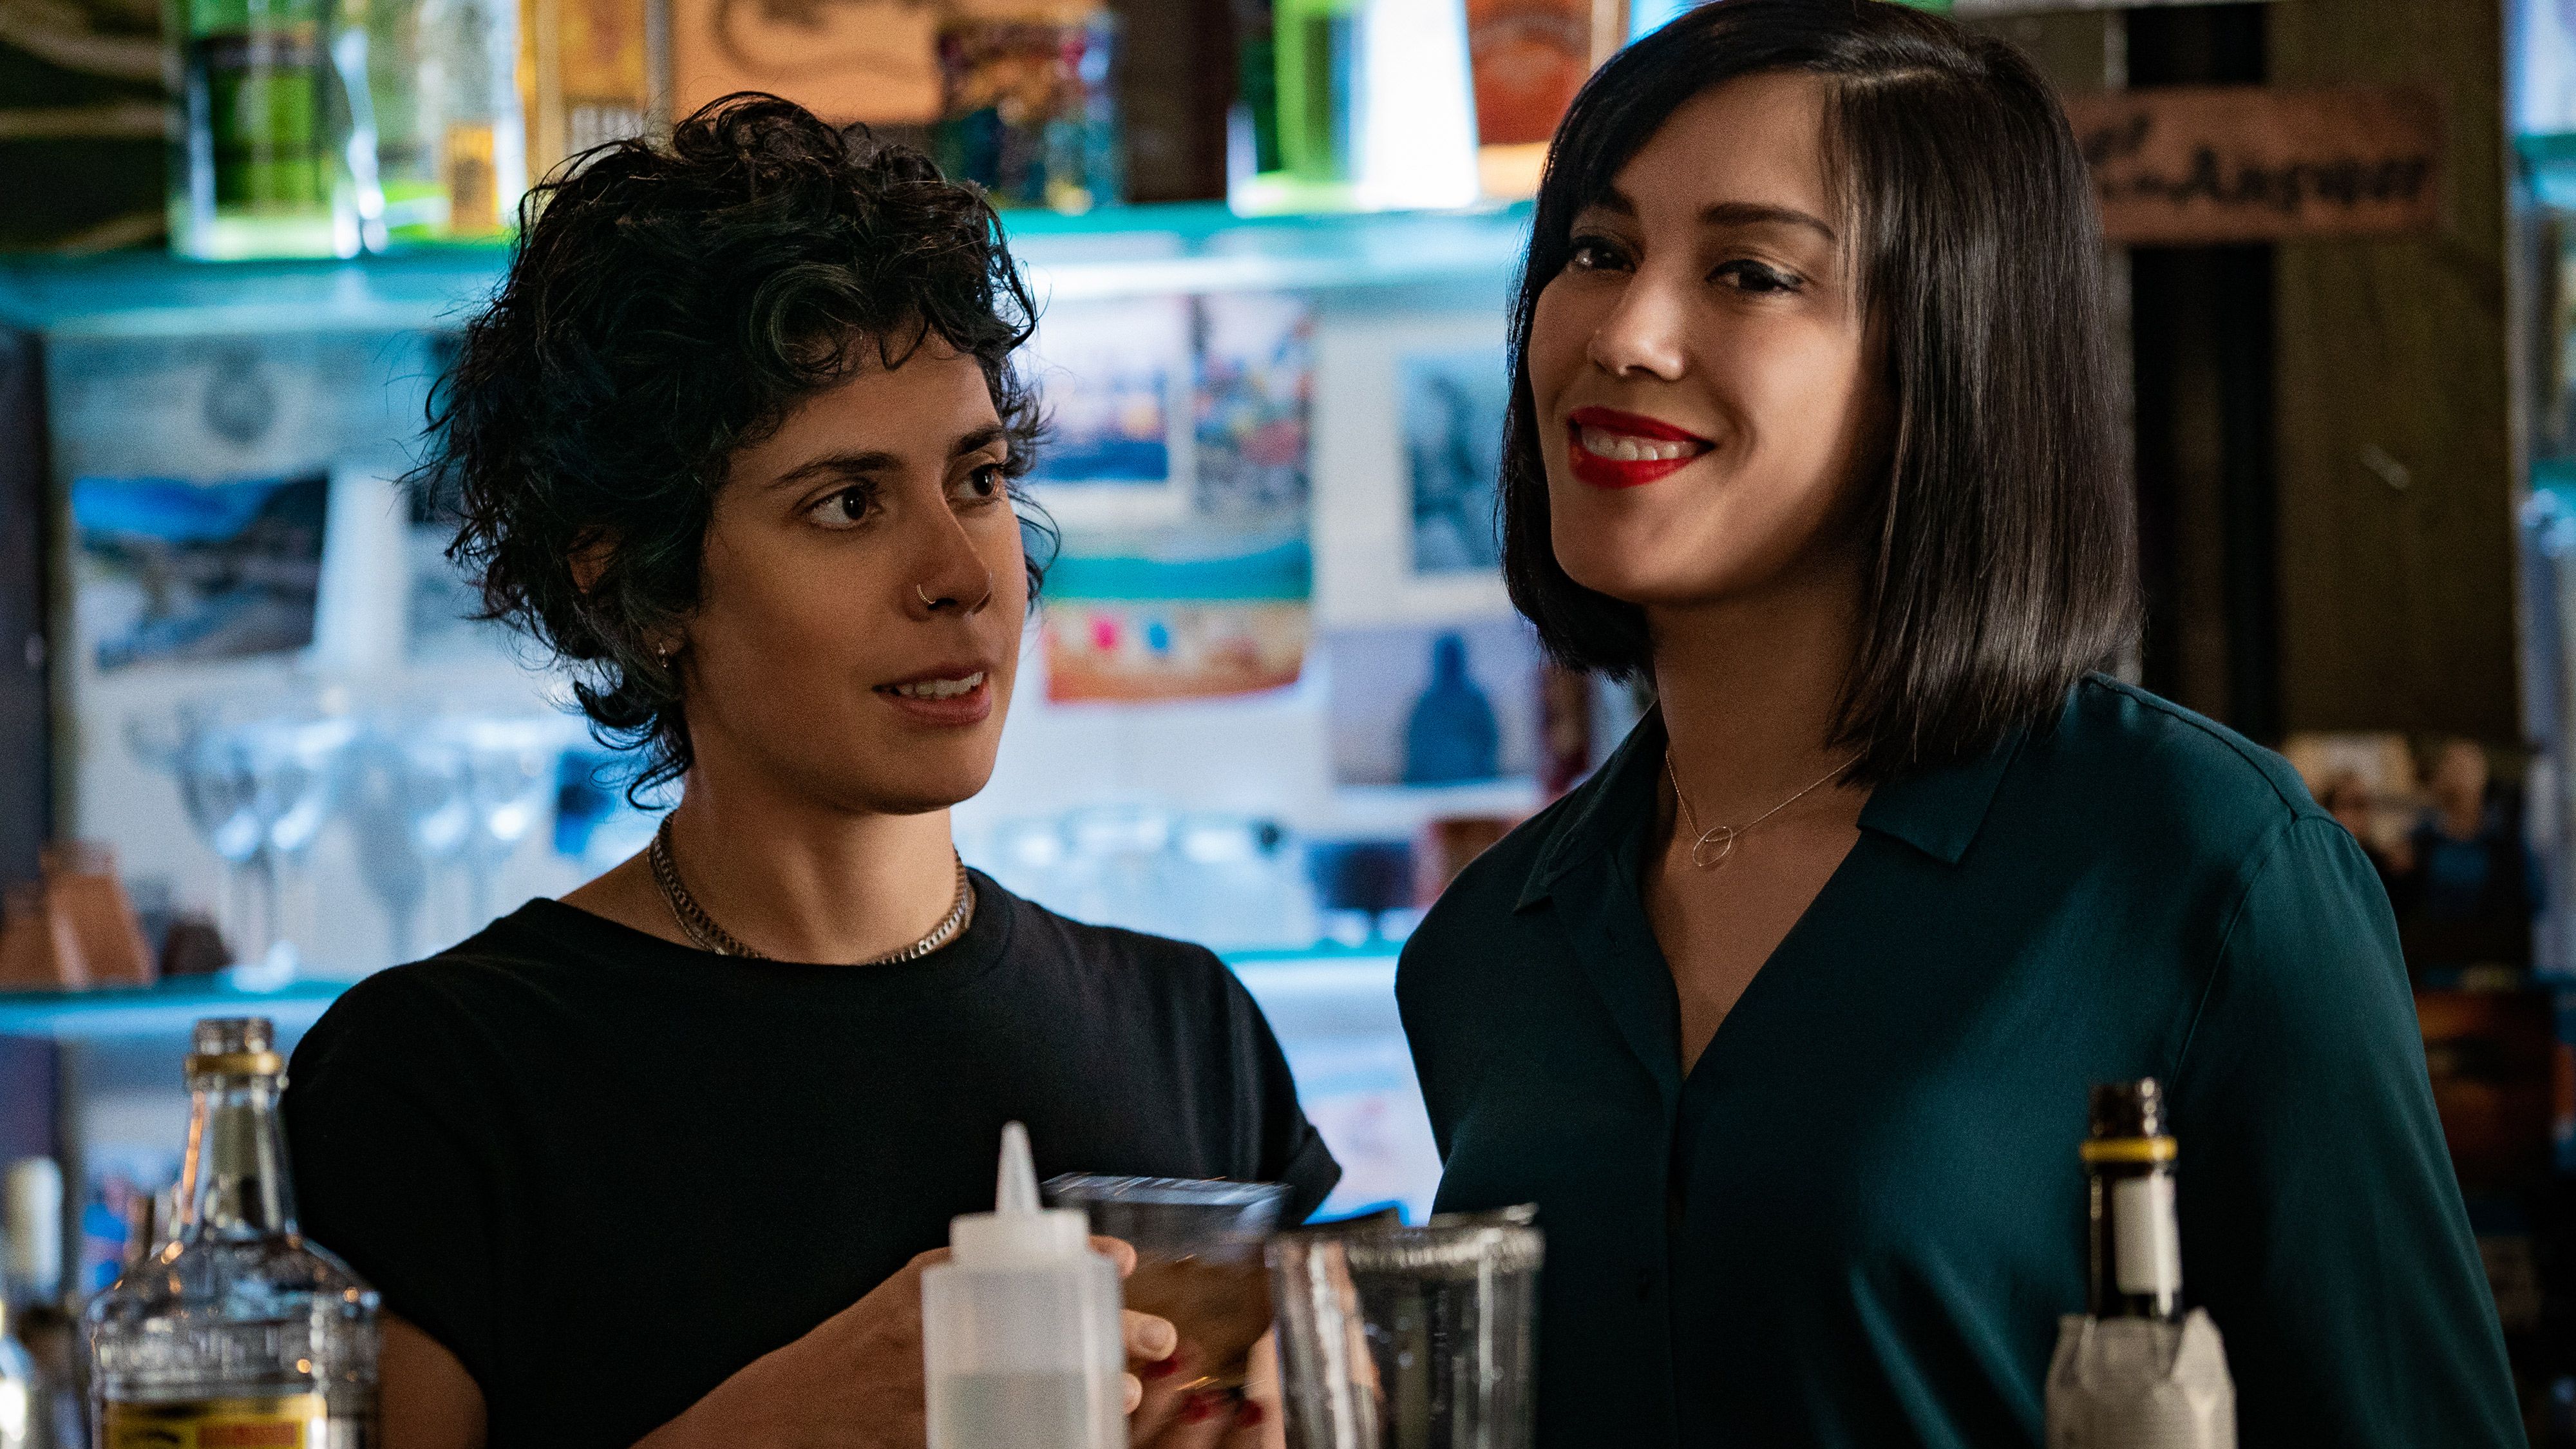 Lesbian Bars Feature In Many Women Centric Tv Shows But Are Missing From Real Life Marie Claire 